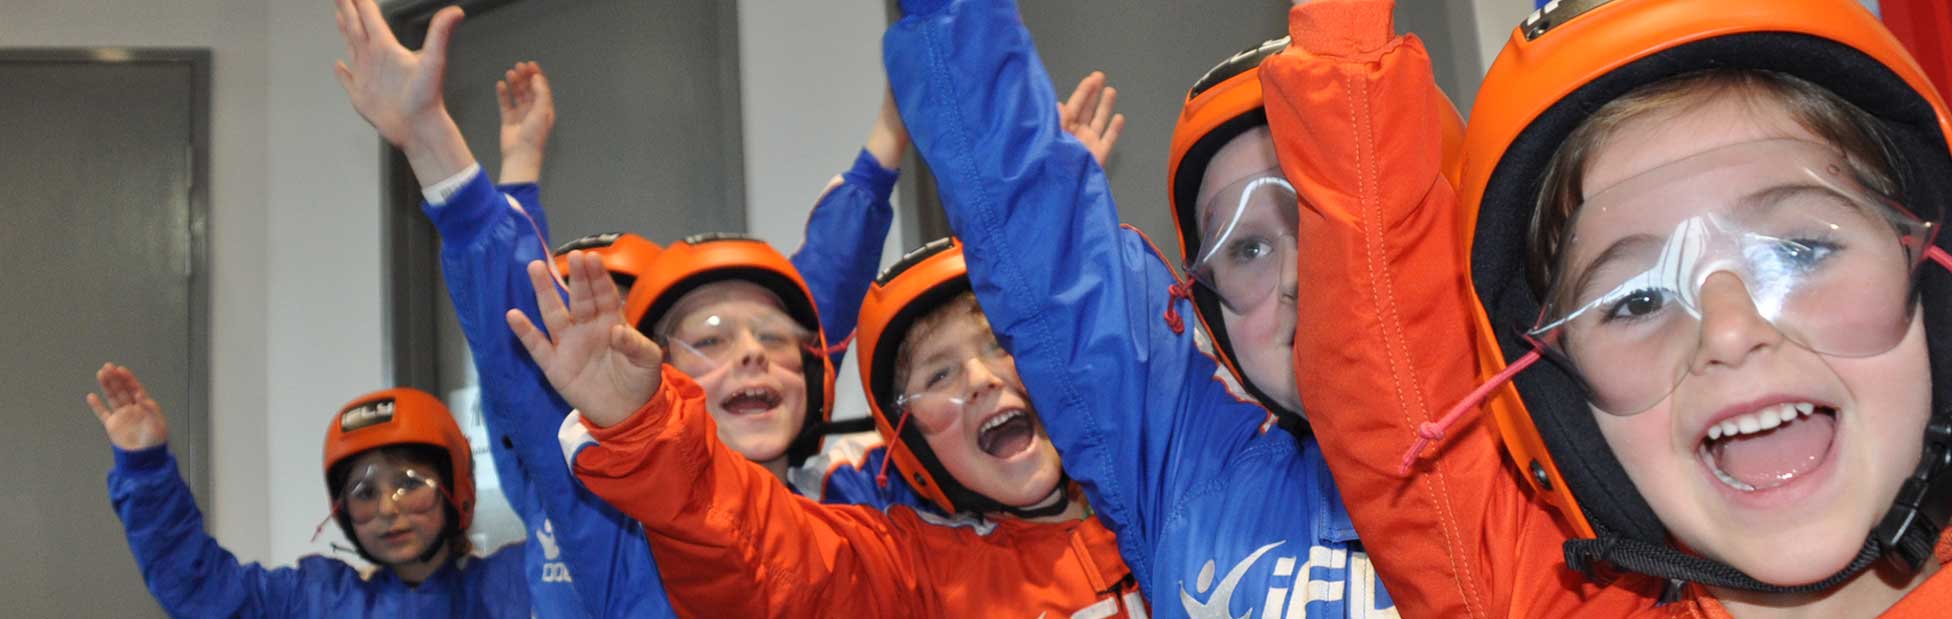 Children dressed to iFLY cheering with hands up